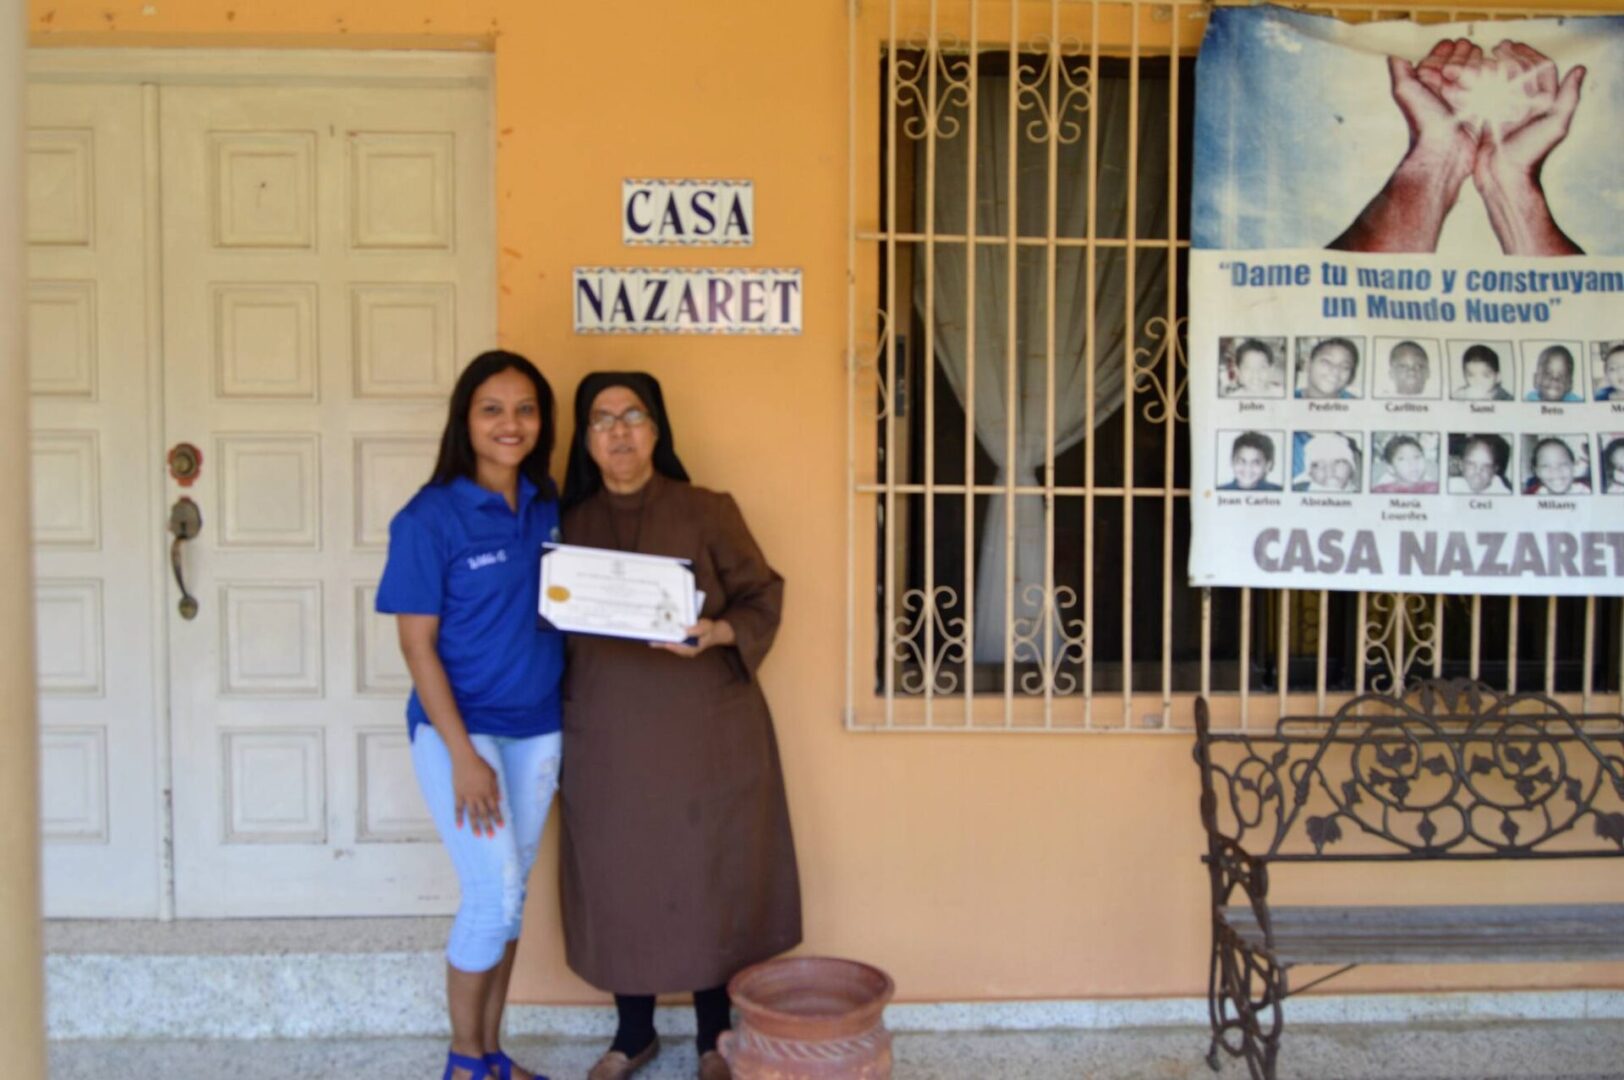 One of our female members and a nun from Casa Nazaret holding a certificate